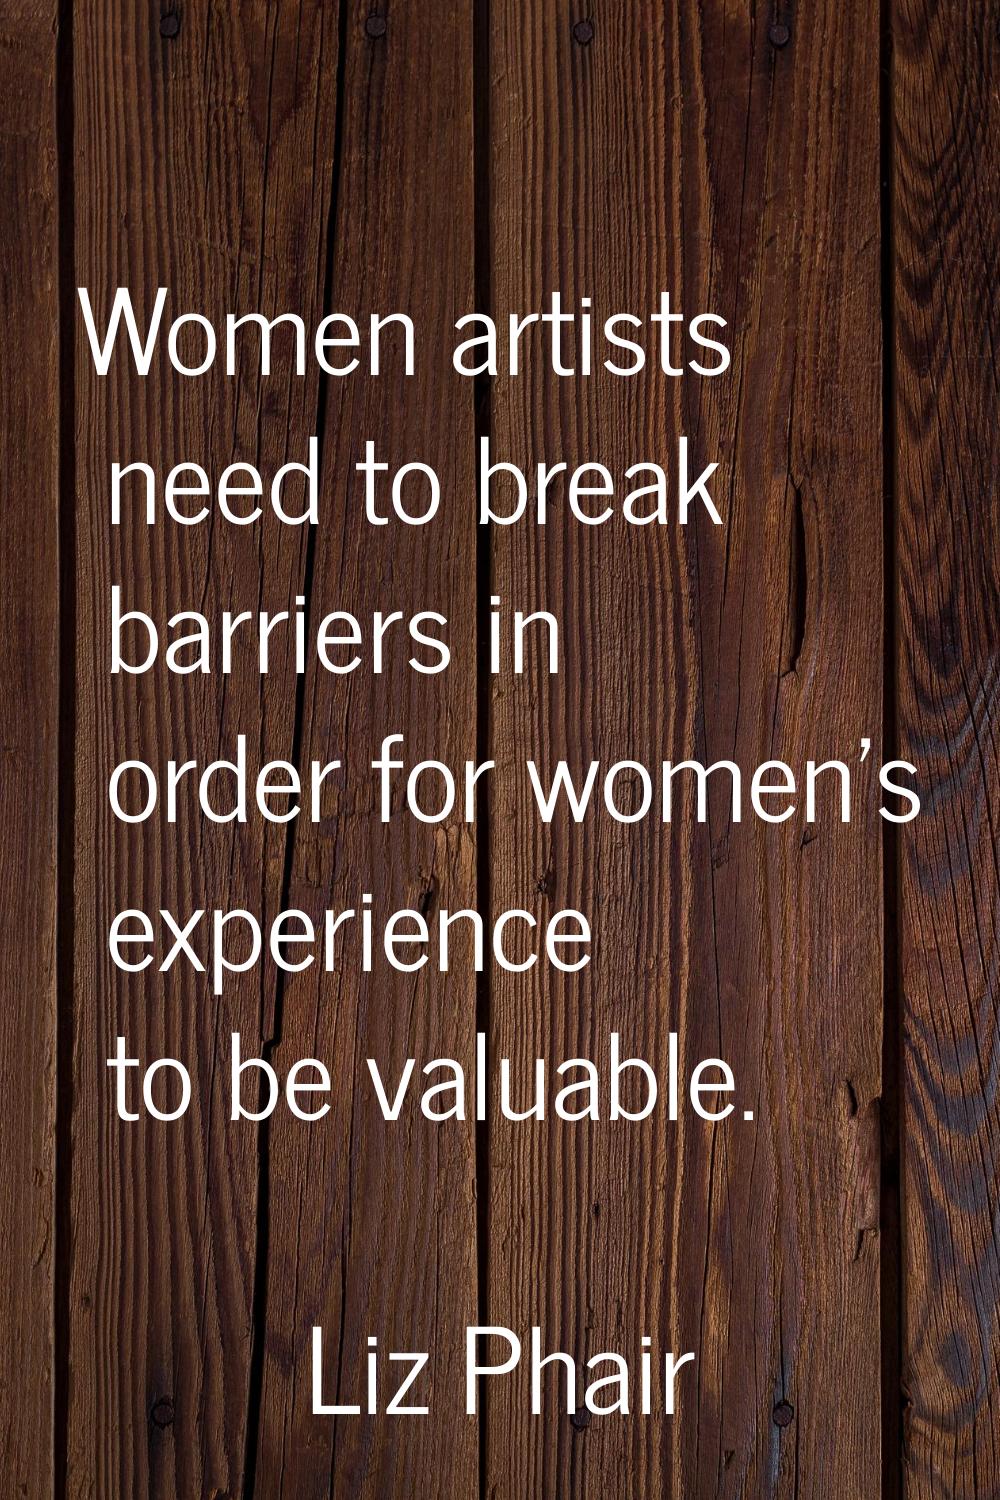 Women artists need to break barriers in order for women's experience to be valuable.